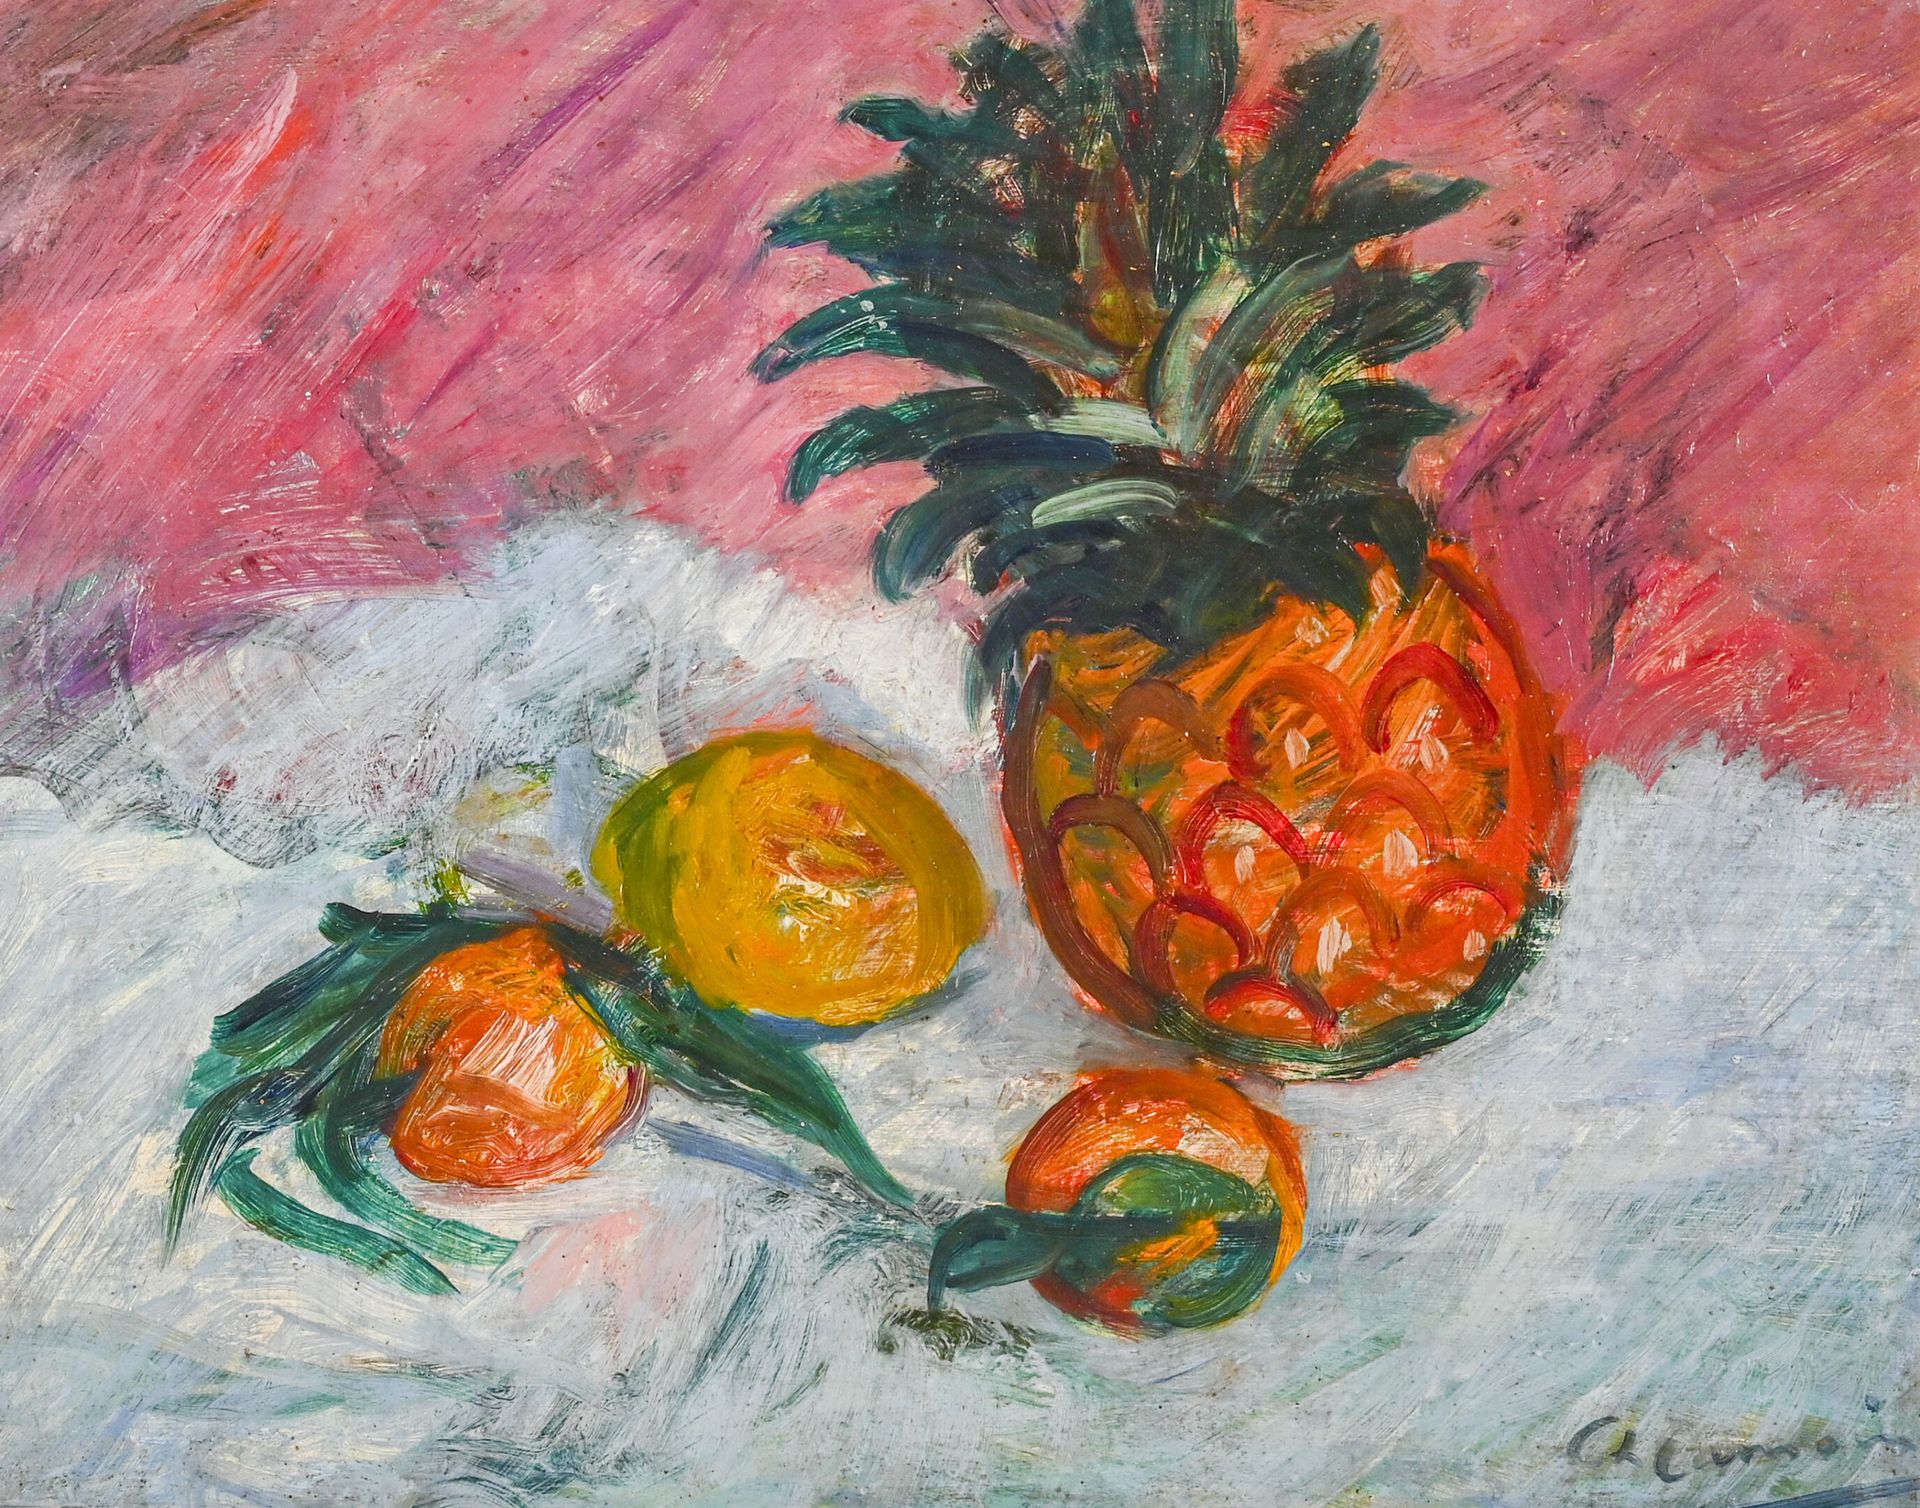 Null Charles CAMOIN (1879-1965)

The Pineapple, around 1908

Oil on panel, signe&hellip;